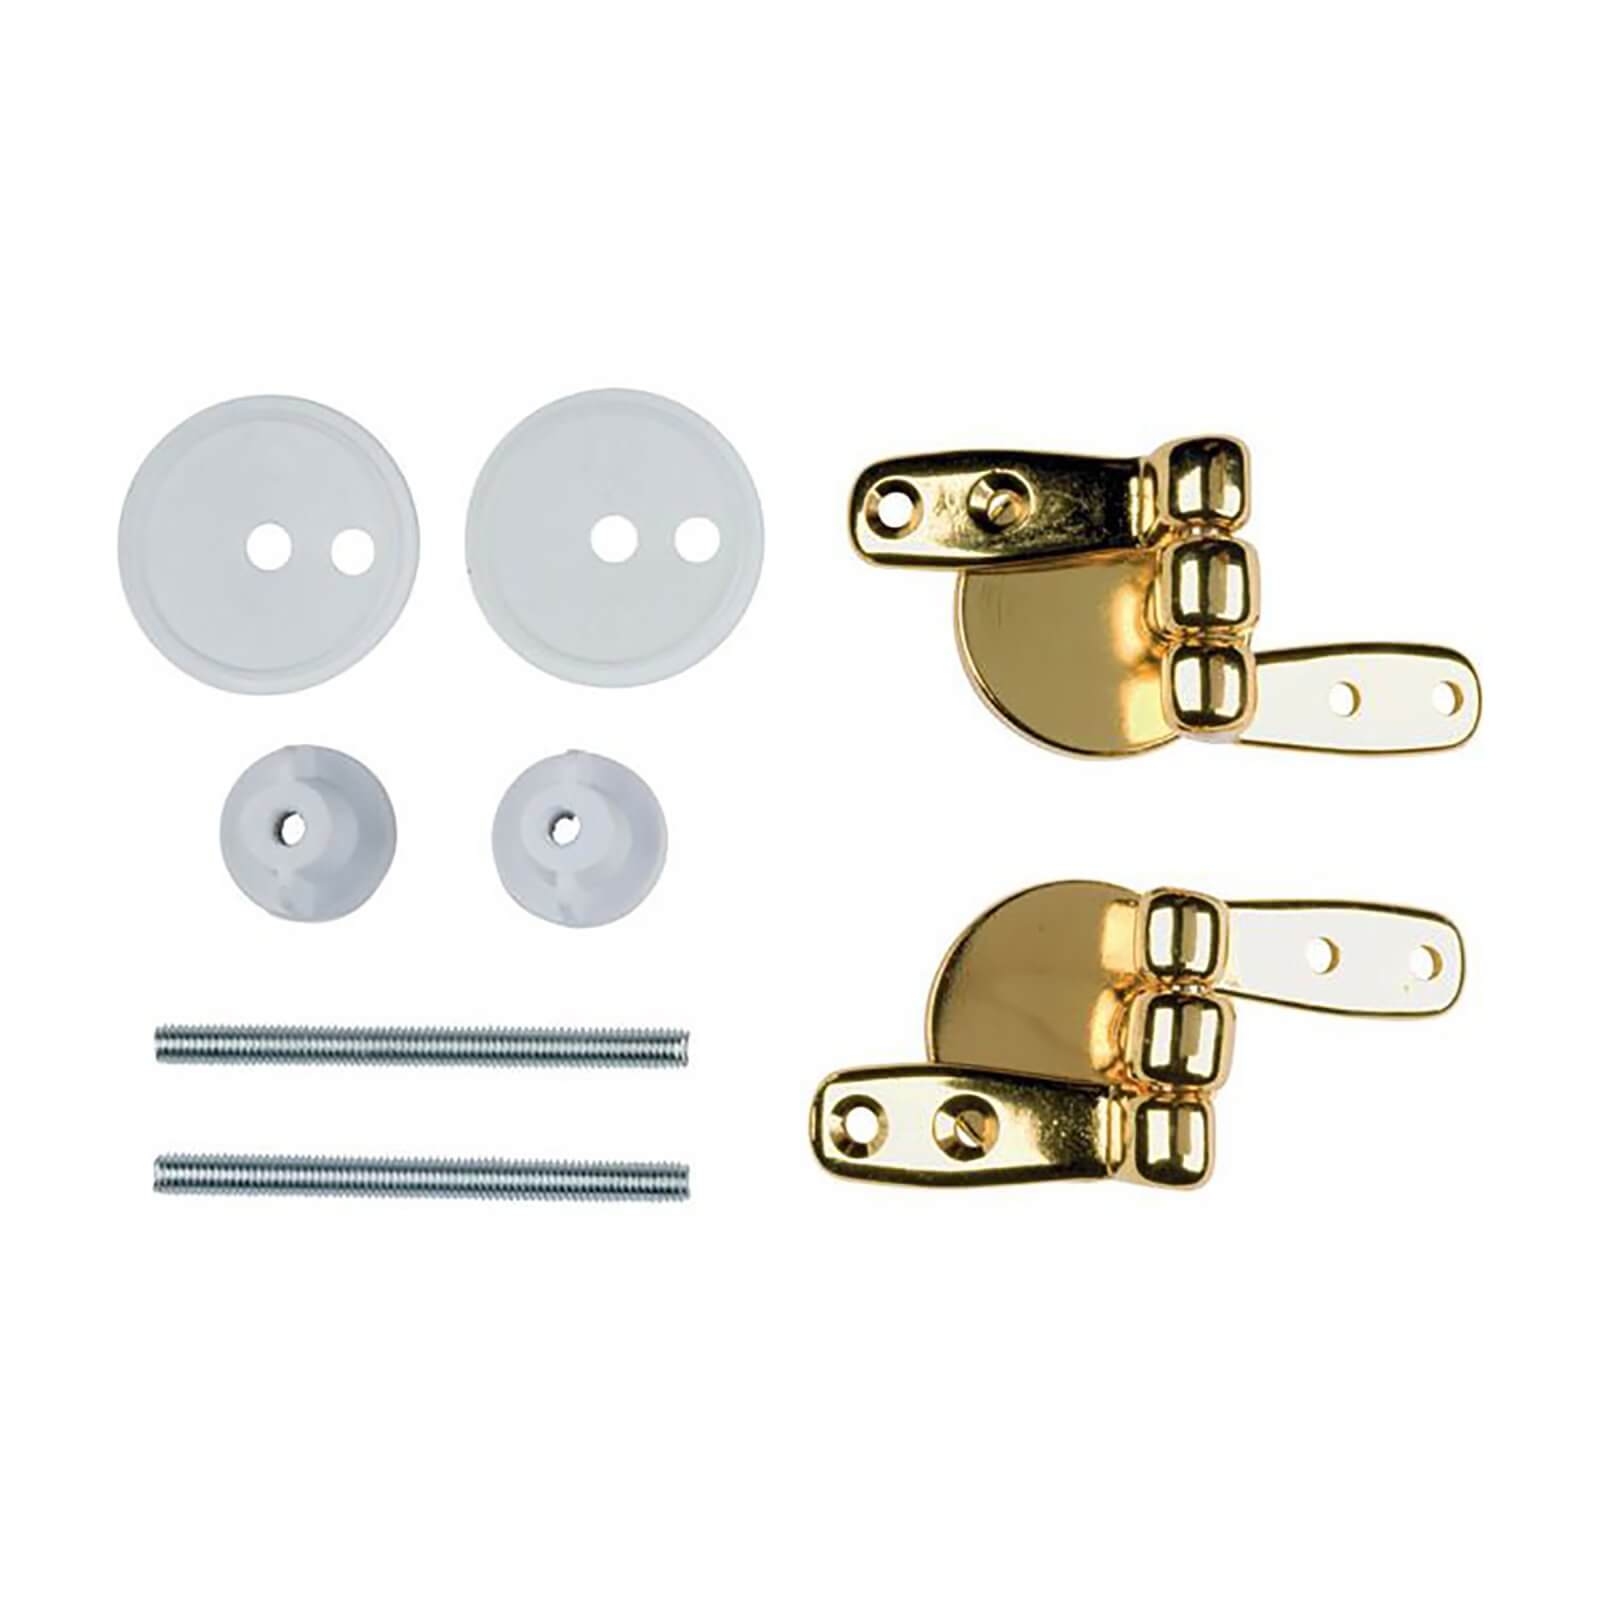 Toilet Seat Hinges - Brass Wooden